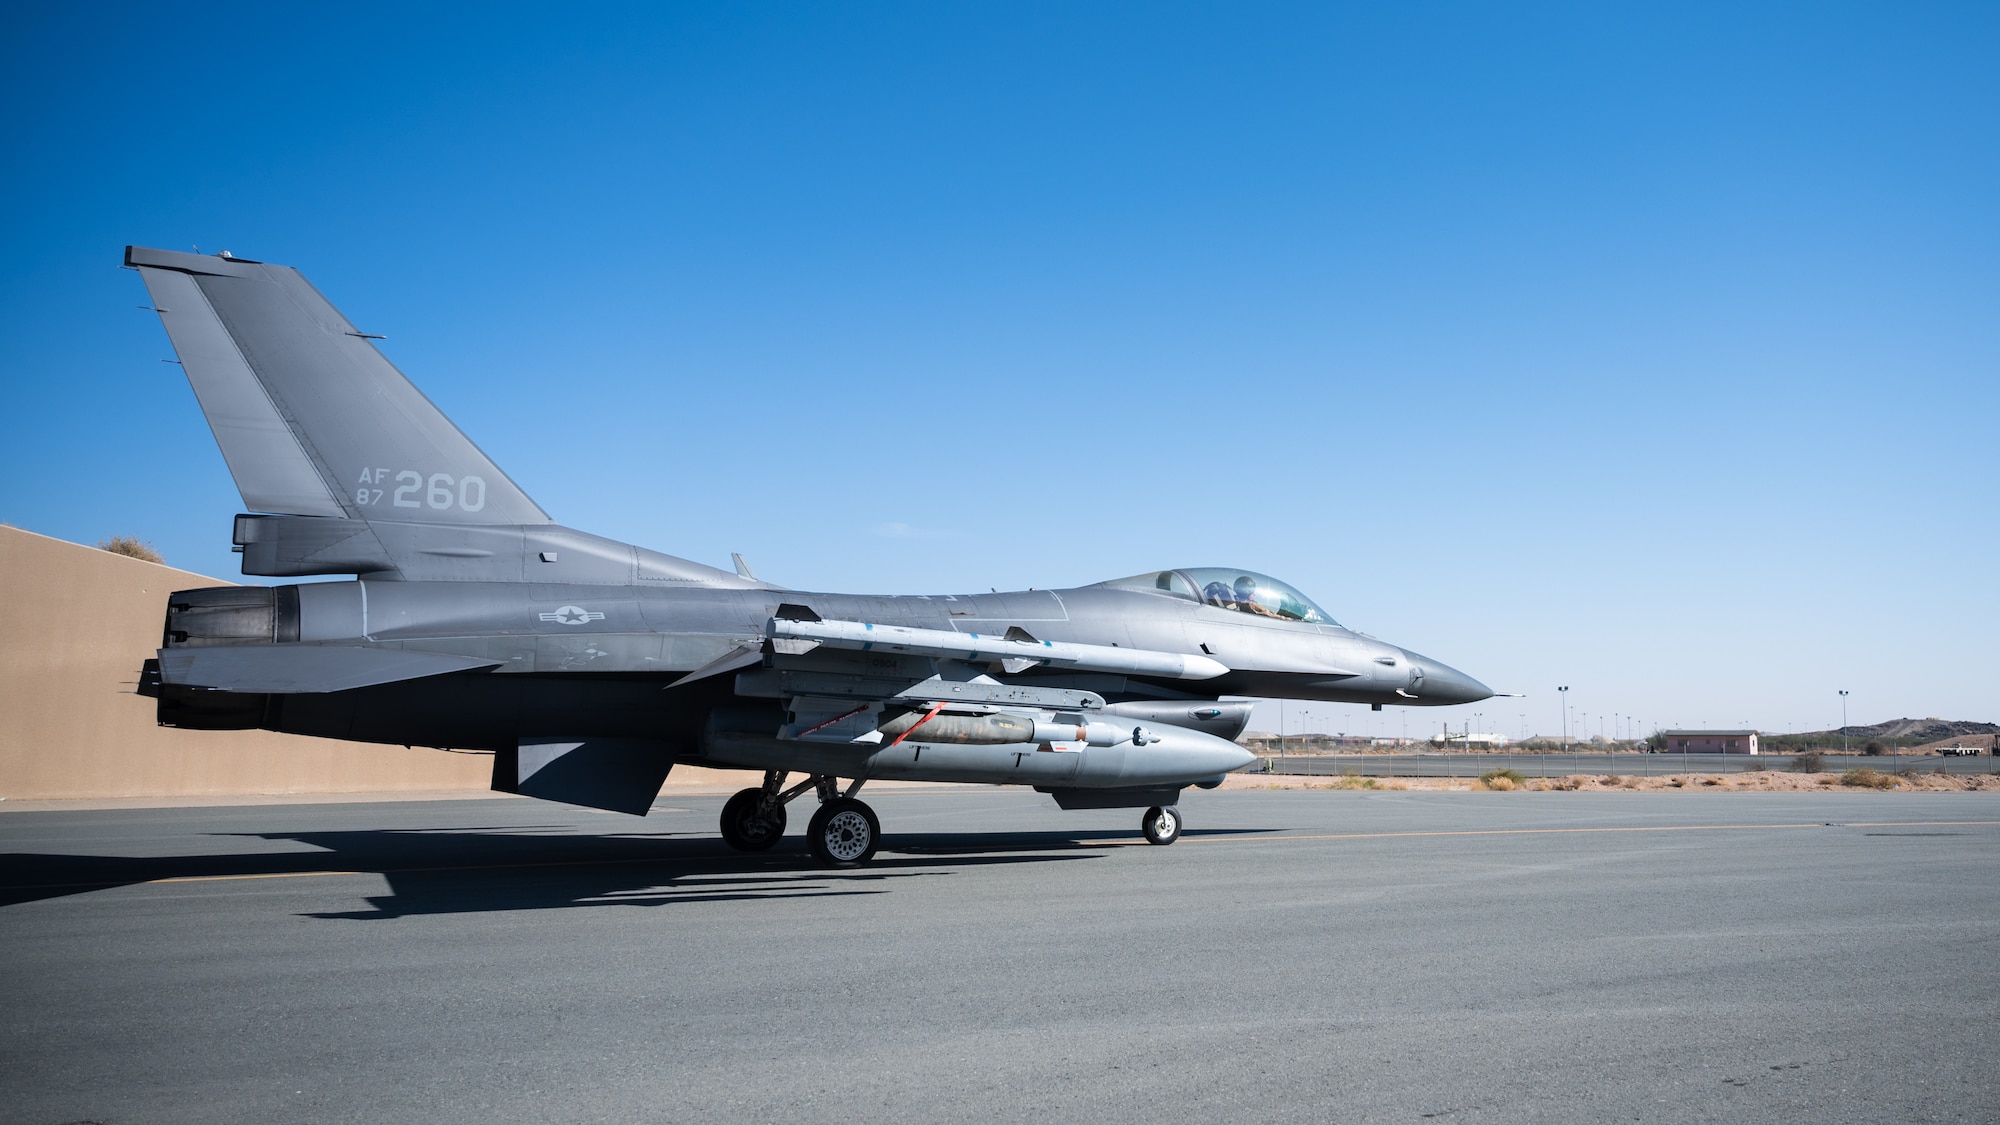 An F-16 Fighting Falcon taxis to the to the runway at King Fahad Air Base, Kingdom of Saudi Arabia, Dec. 7, 2021. U.S. F-16s integrated with Royal Saudi Air Force F-15s to strengthen and reinforce air defenses against any potential threats. (U.S. Air Force photo by Senior Airman Jacob B. Wrightsman)